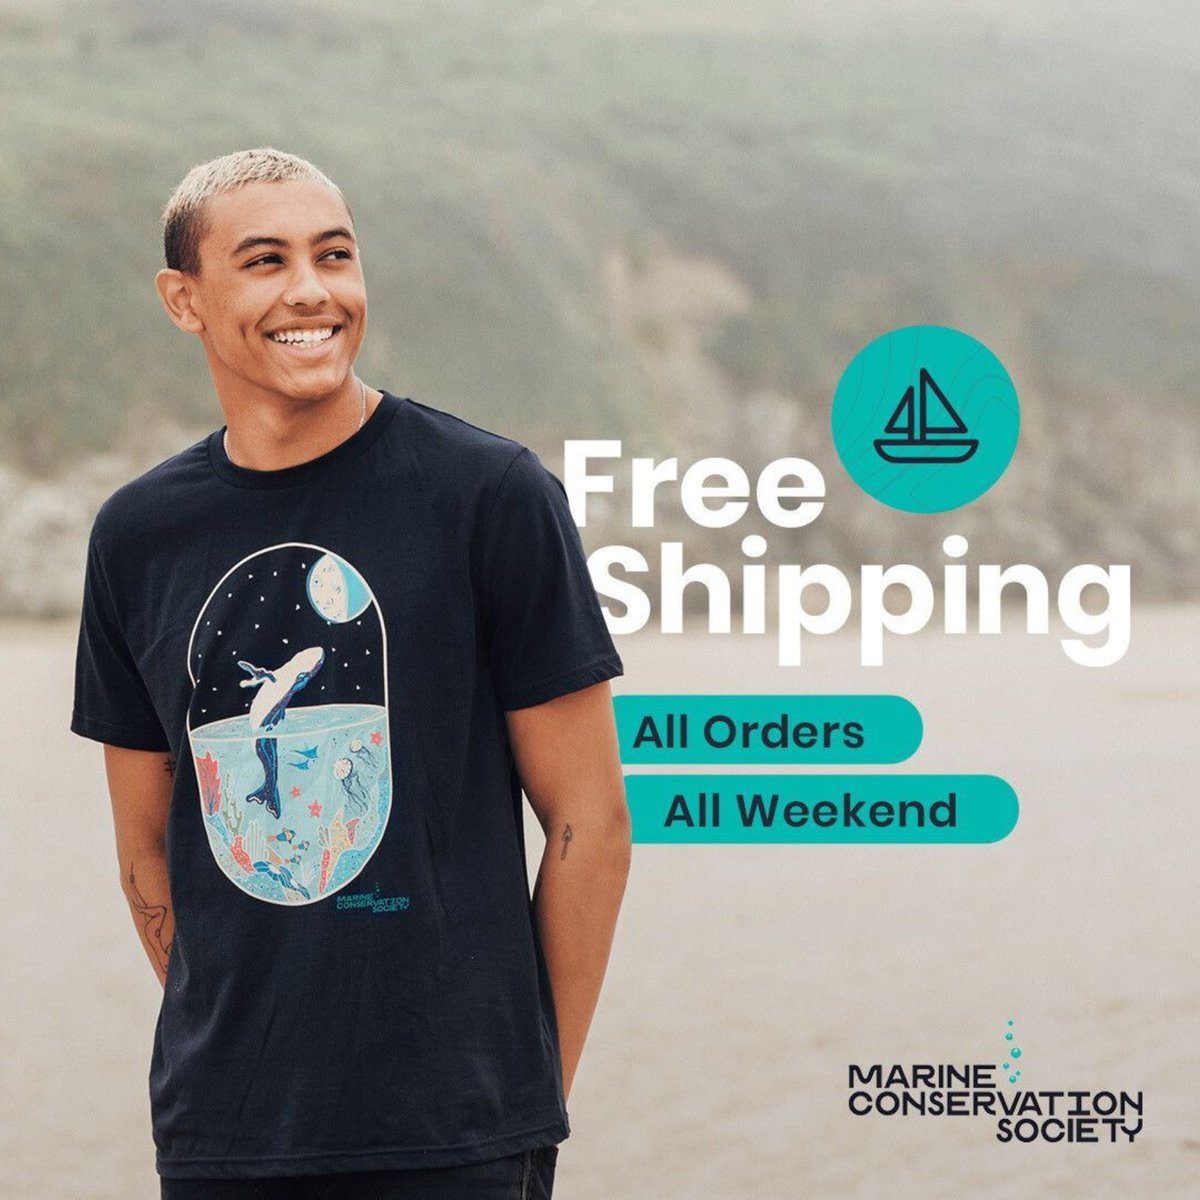 To celebrate the #BankHoliday, our shop is offering free UK shipping on every order from today until the end of Monday 🐟 Hop on over to choose some epic, organic, sustainable goodies that help protect our ocean 👉 mcsshop.org.uk